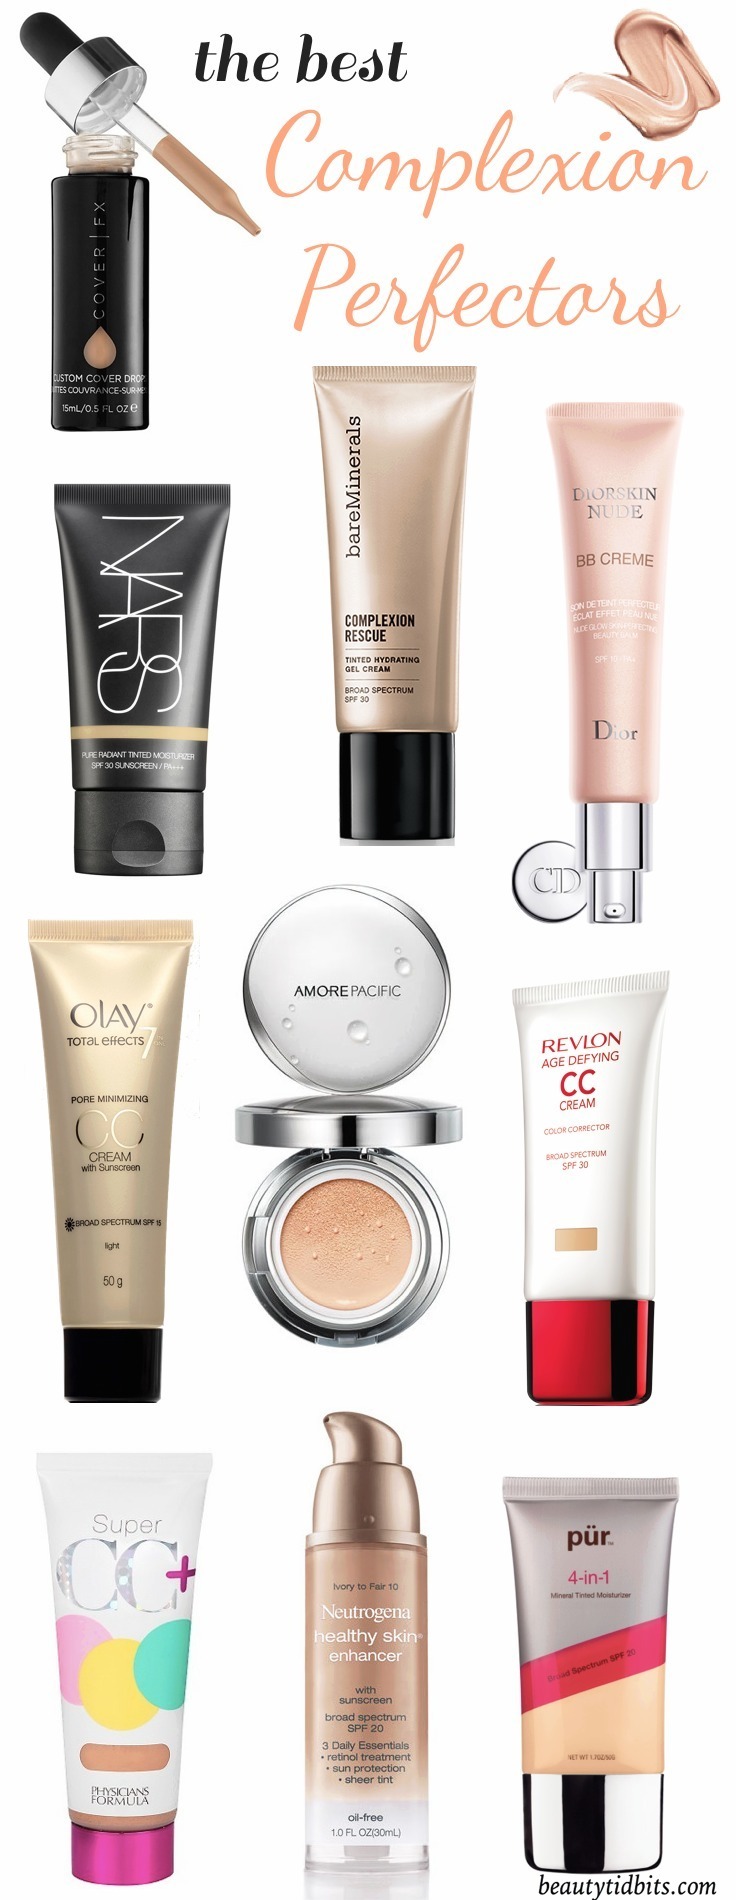 Want complexion perfection? These pore-blurring, shine-erasing, skin-evening perfectors will help you on your way to flawlessness when totally perfect skin is in order!